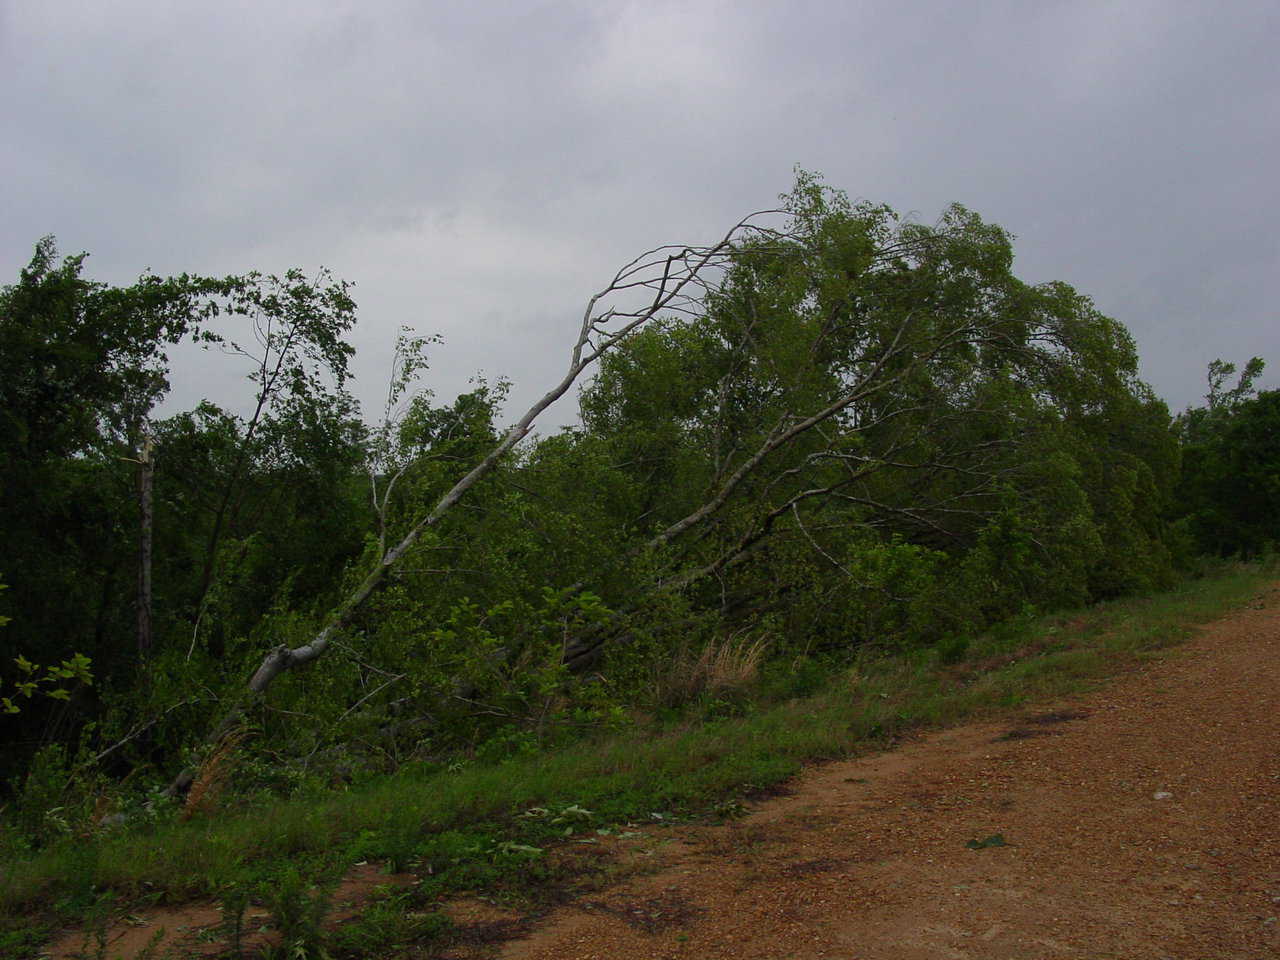 Destroyed – On the Averys’ property, trees that had survived for more than 100 years did not survive this F3 tornado. It uprooted this large hickory.